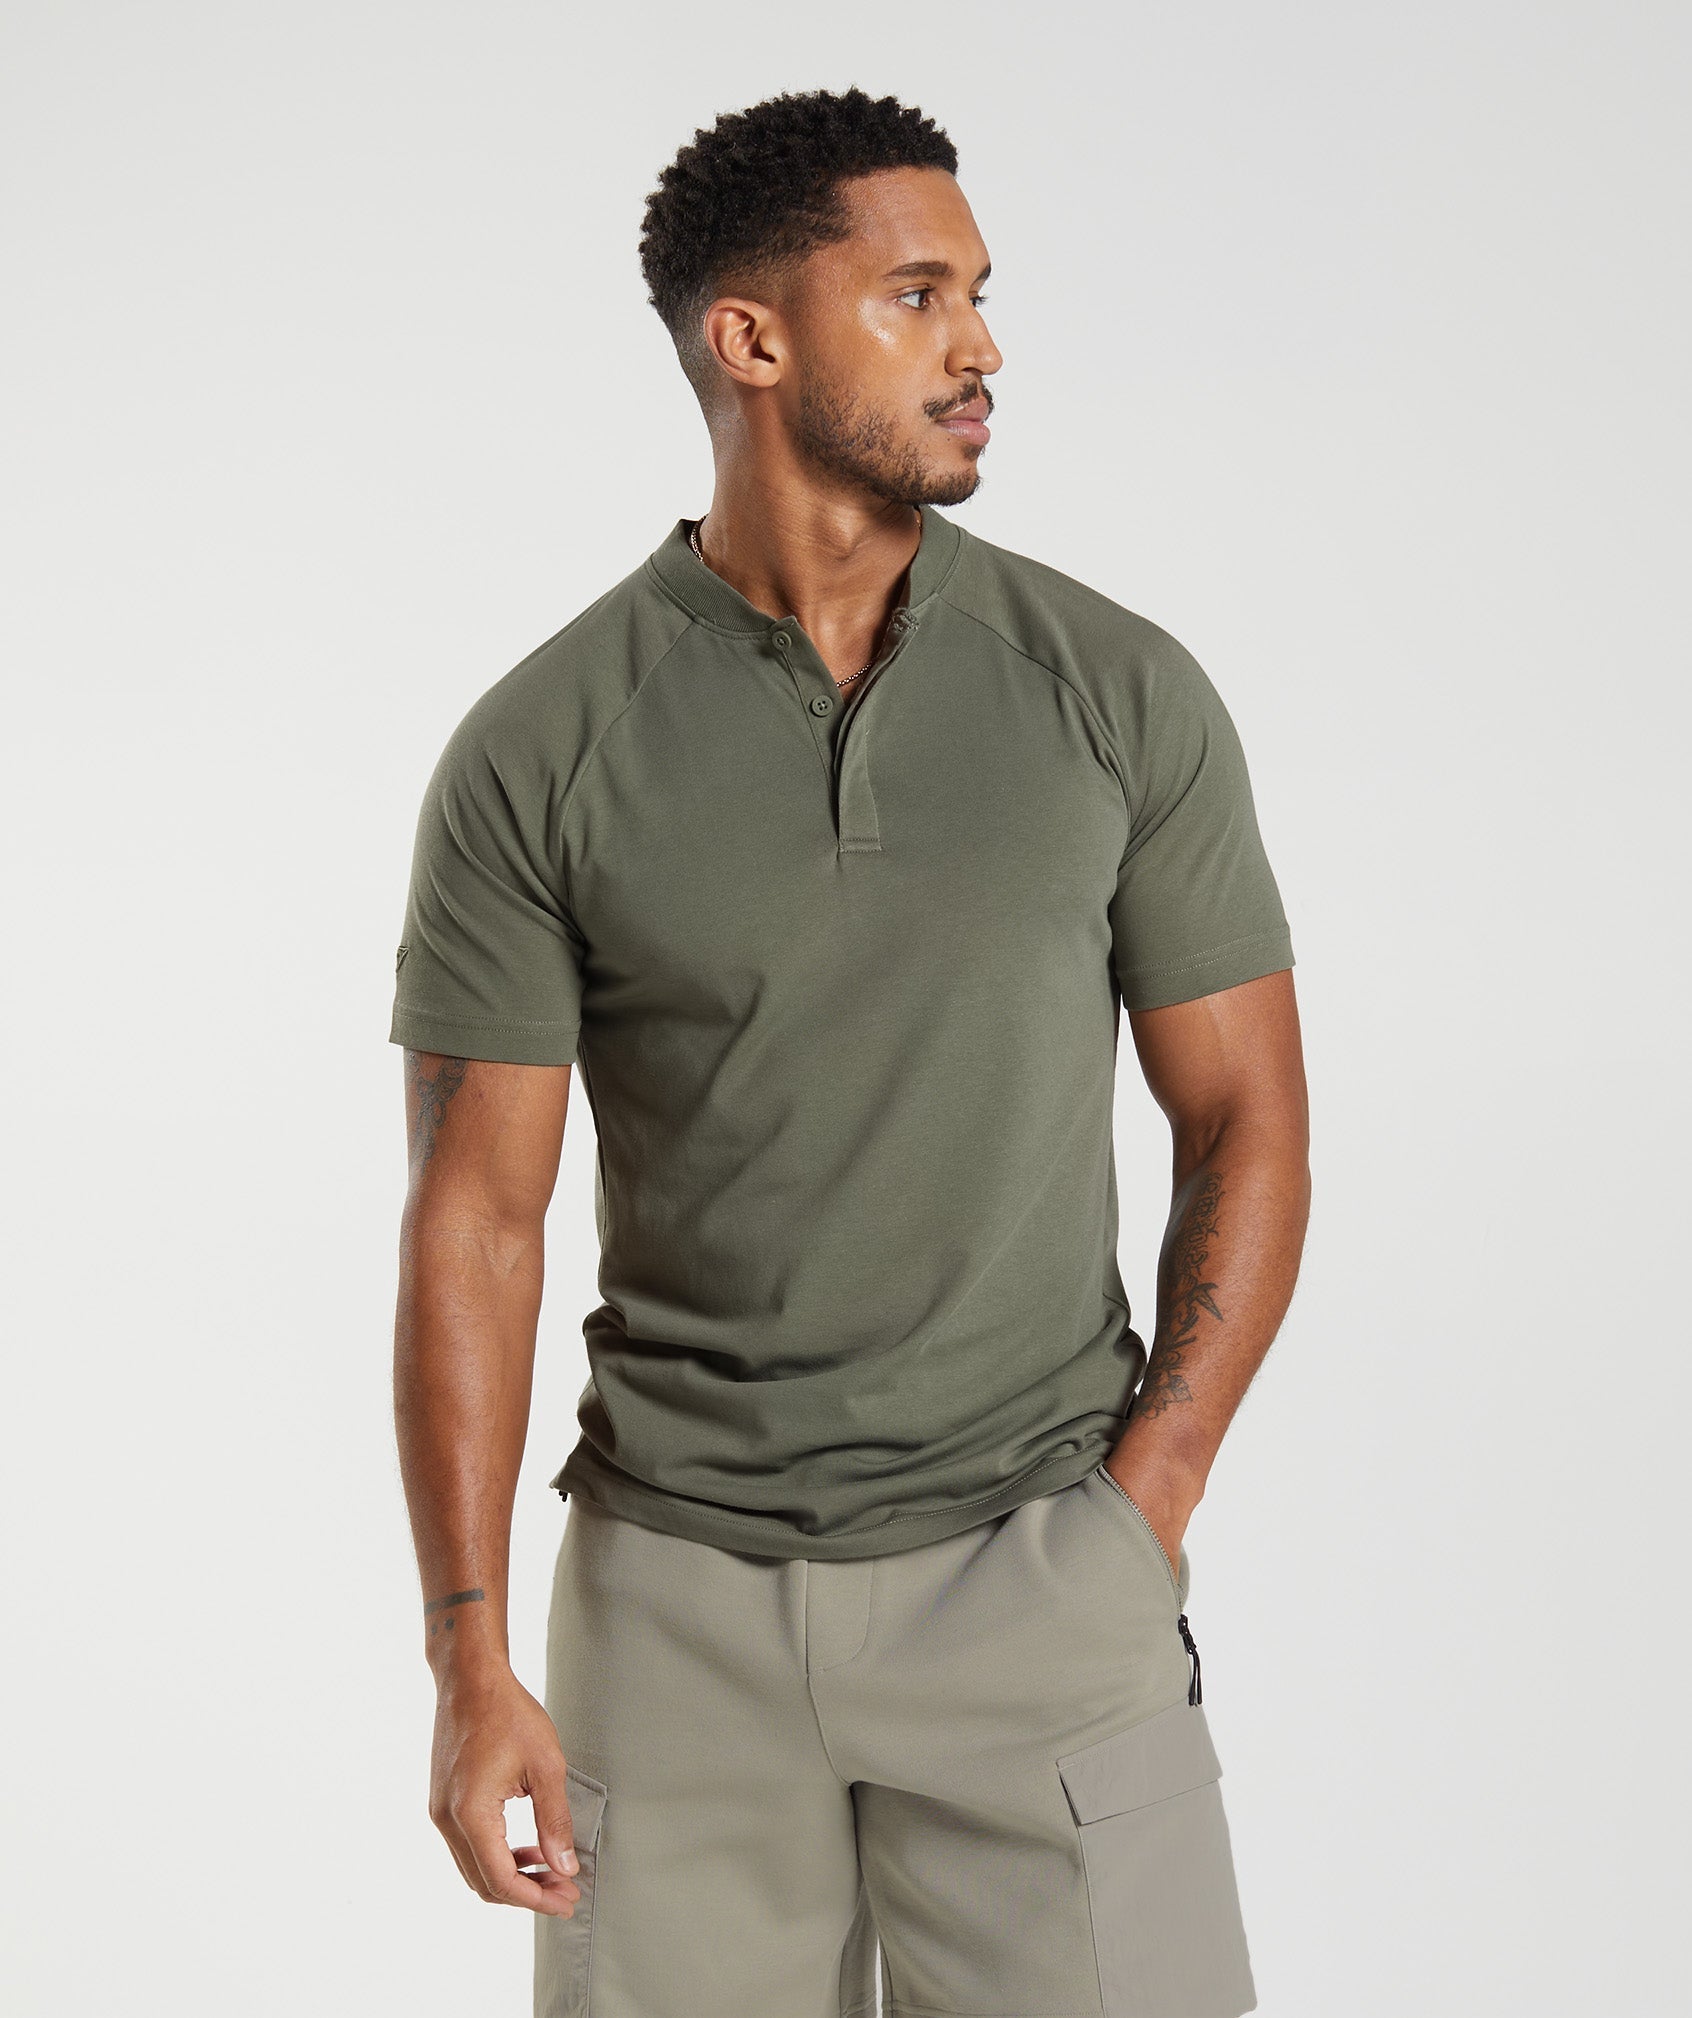 Rest Day Commute Polo Shirt in Dusty Olive - view 1